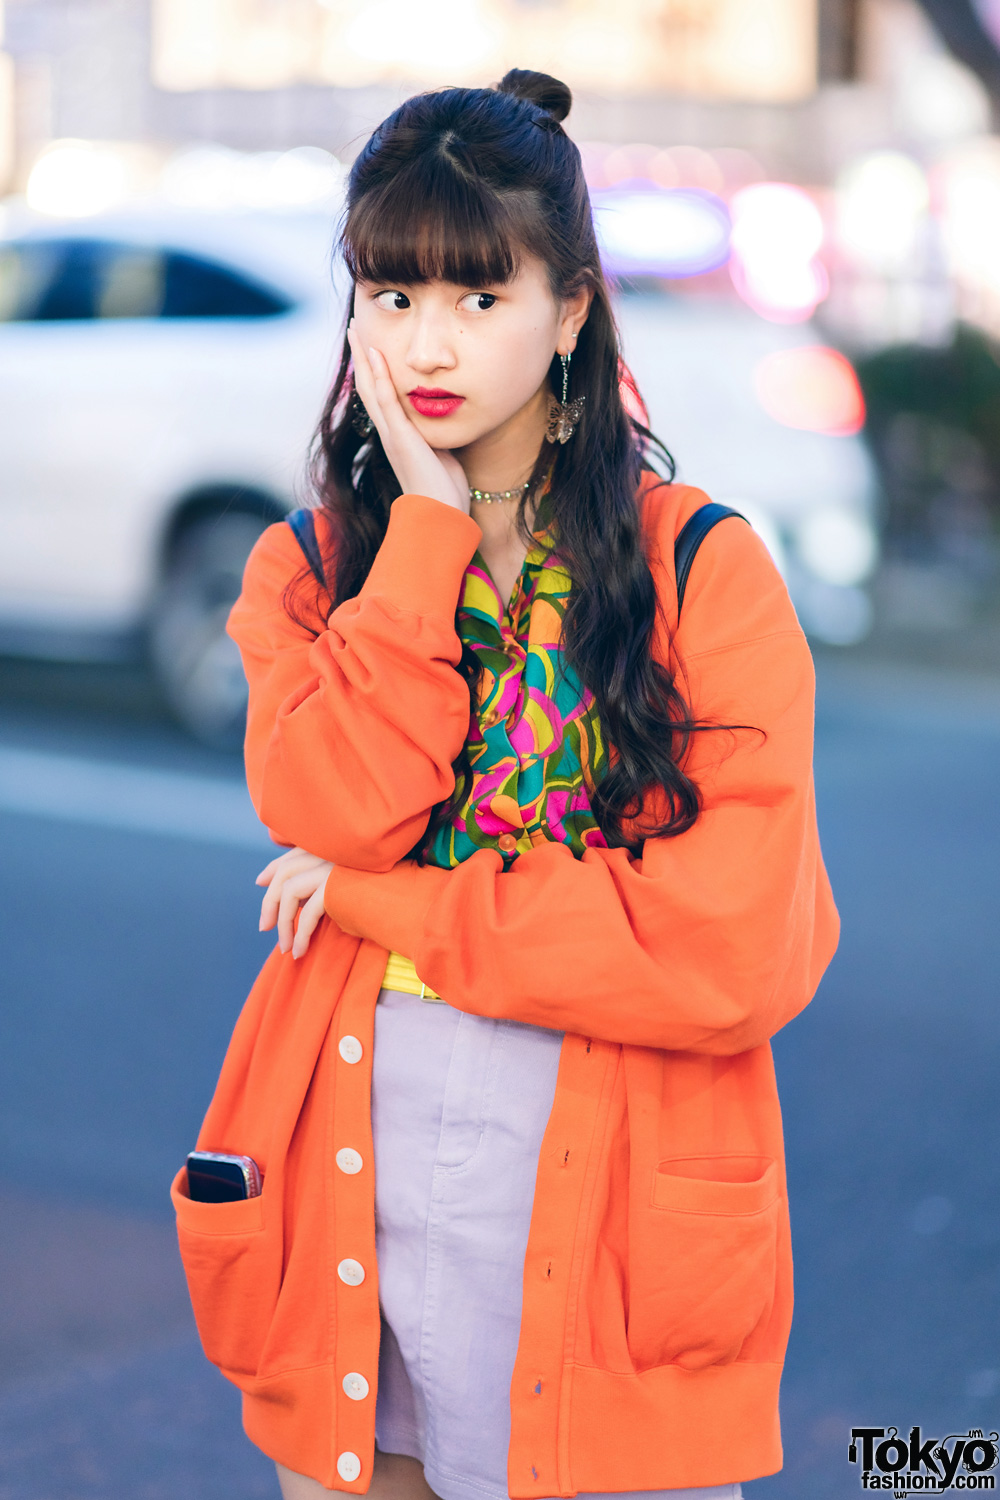 Japanese Pop Idol A-pon in Vintage-Inspired Street Fashion w/ Butterfly ...